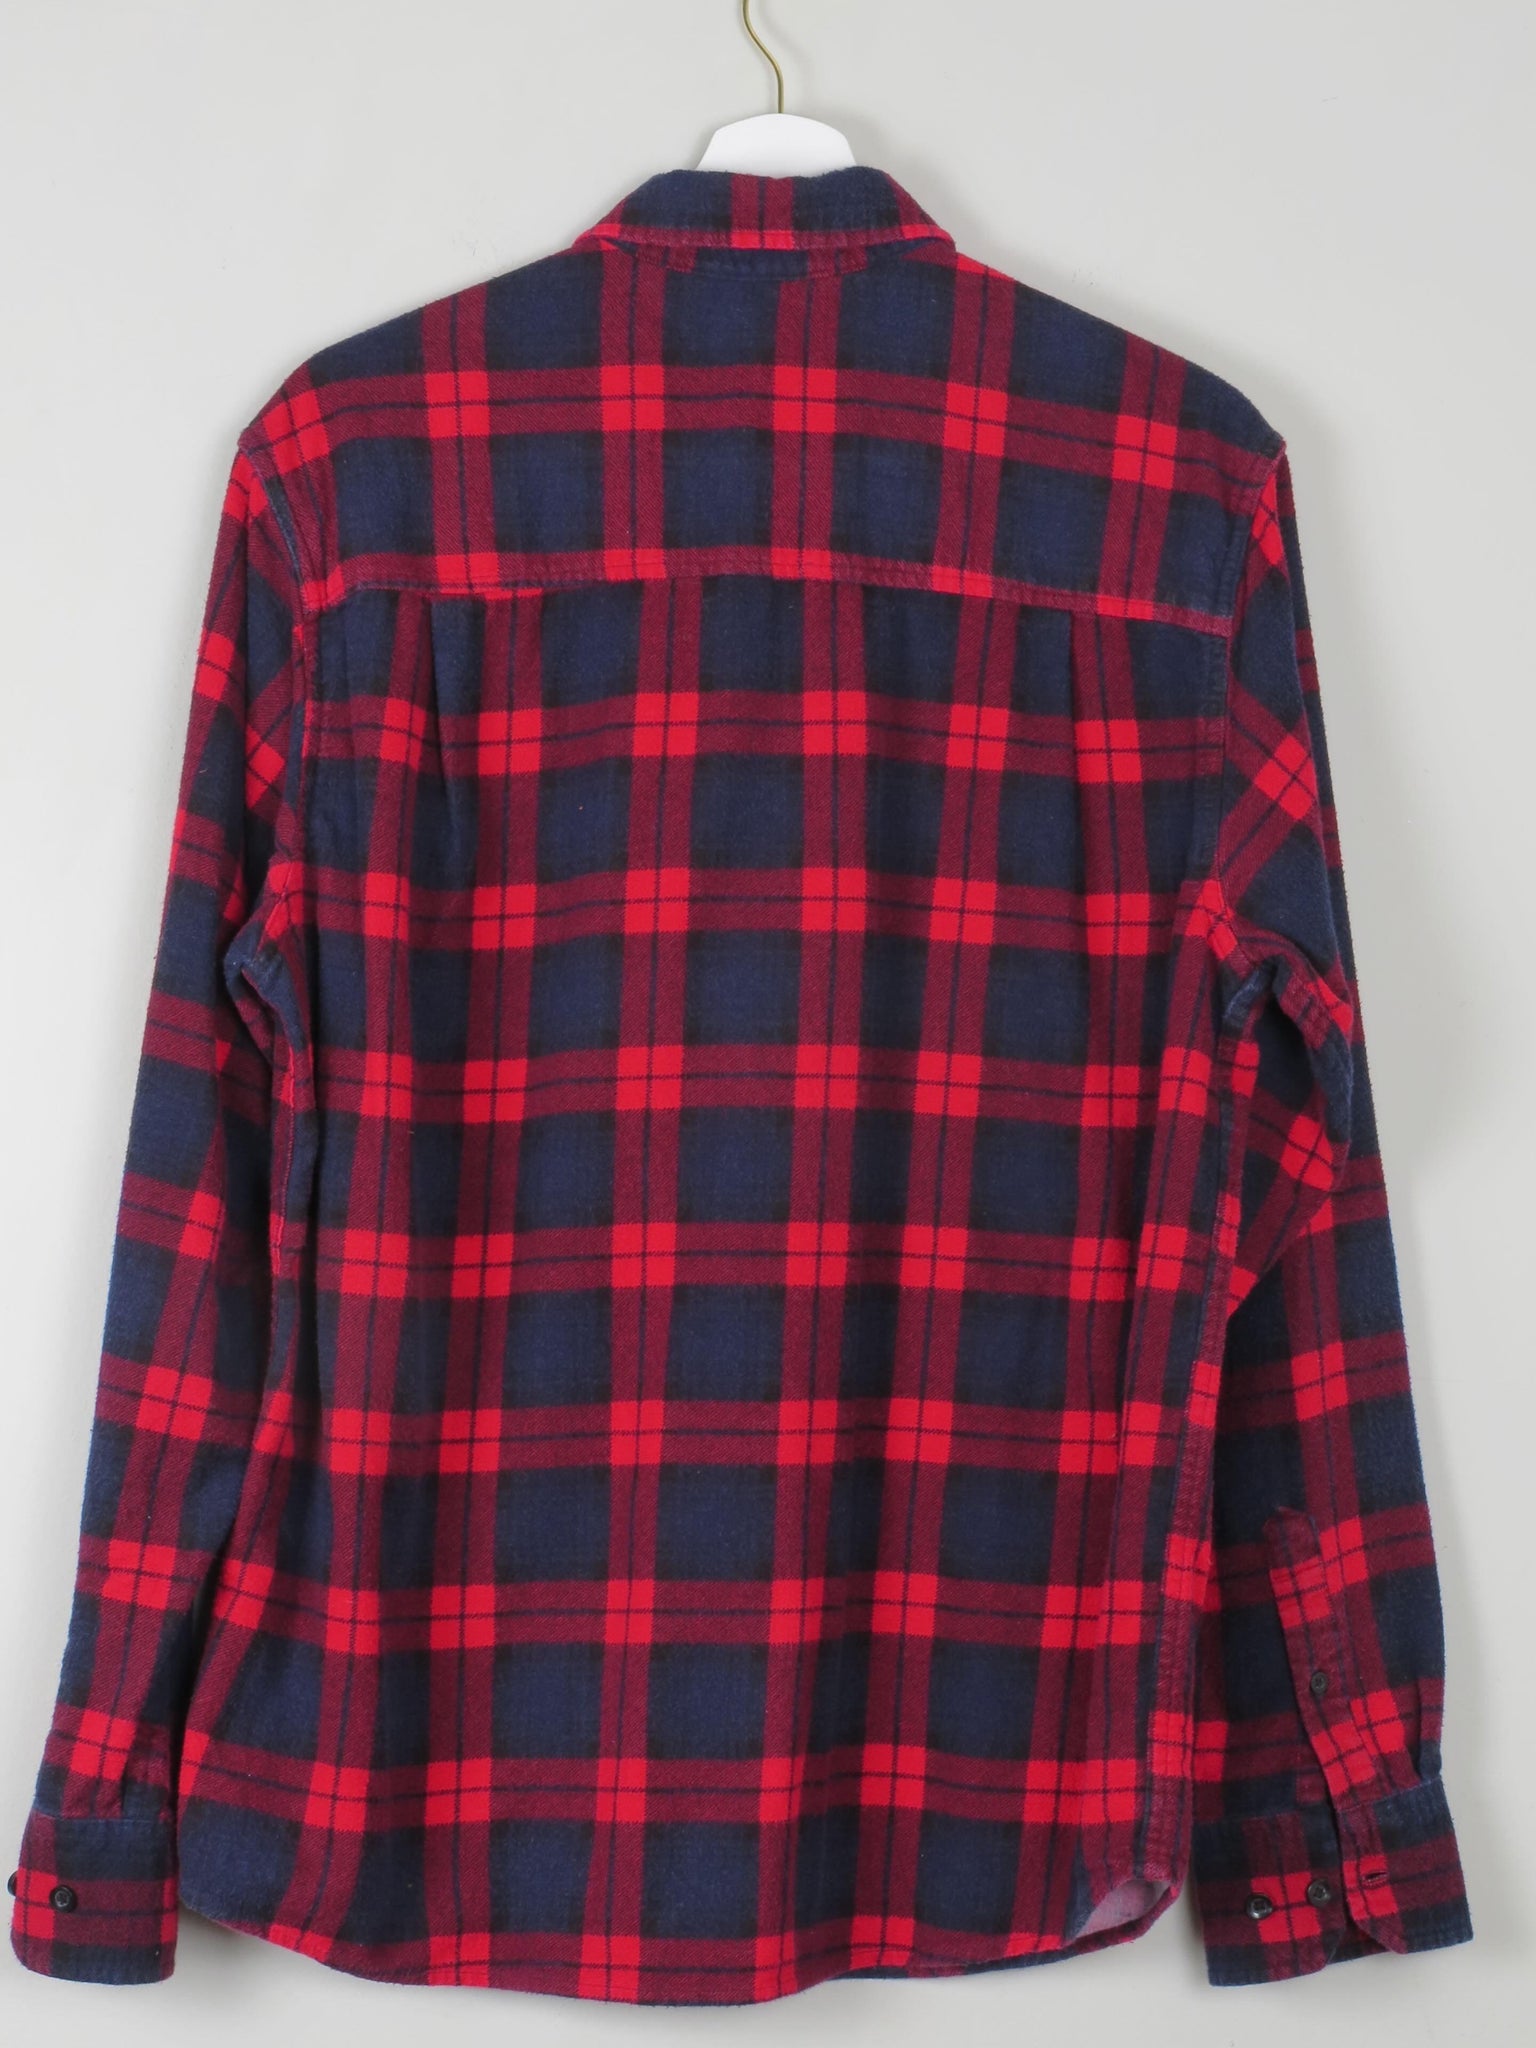 Men's Vintage Style Check Flannel Shirt M - The Harlequin